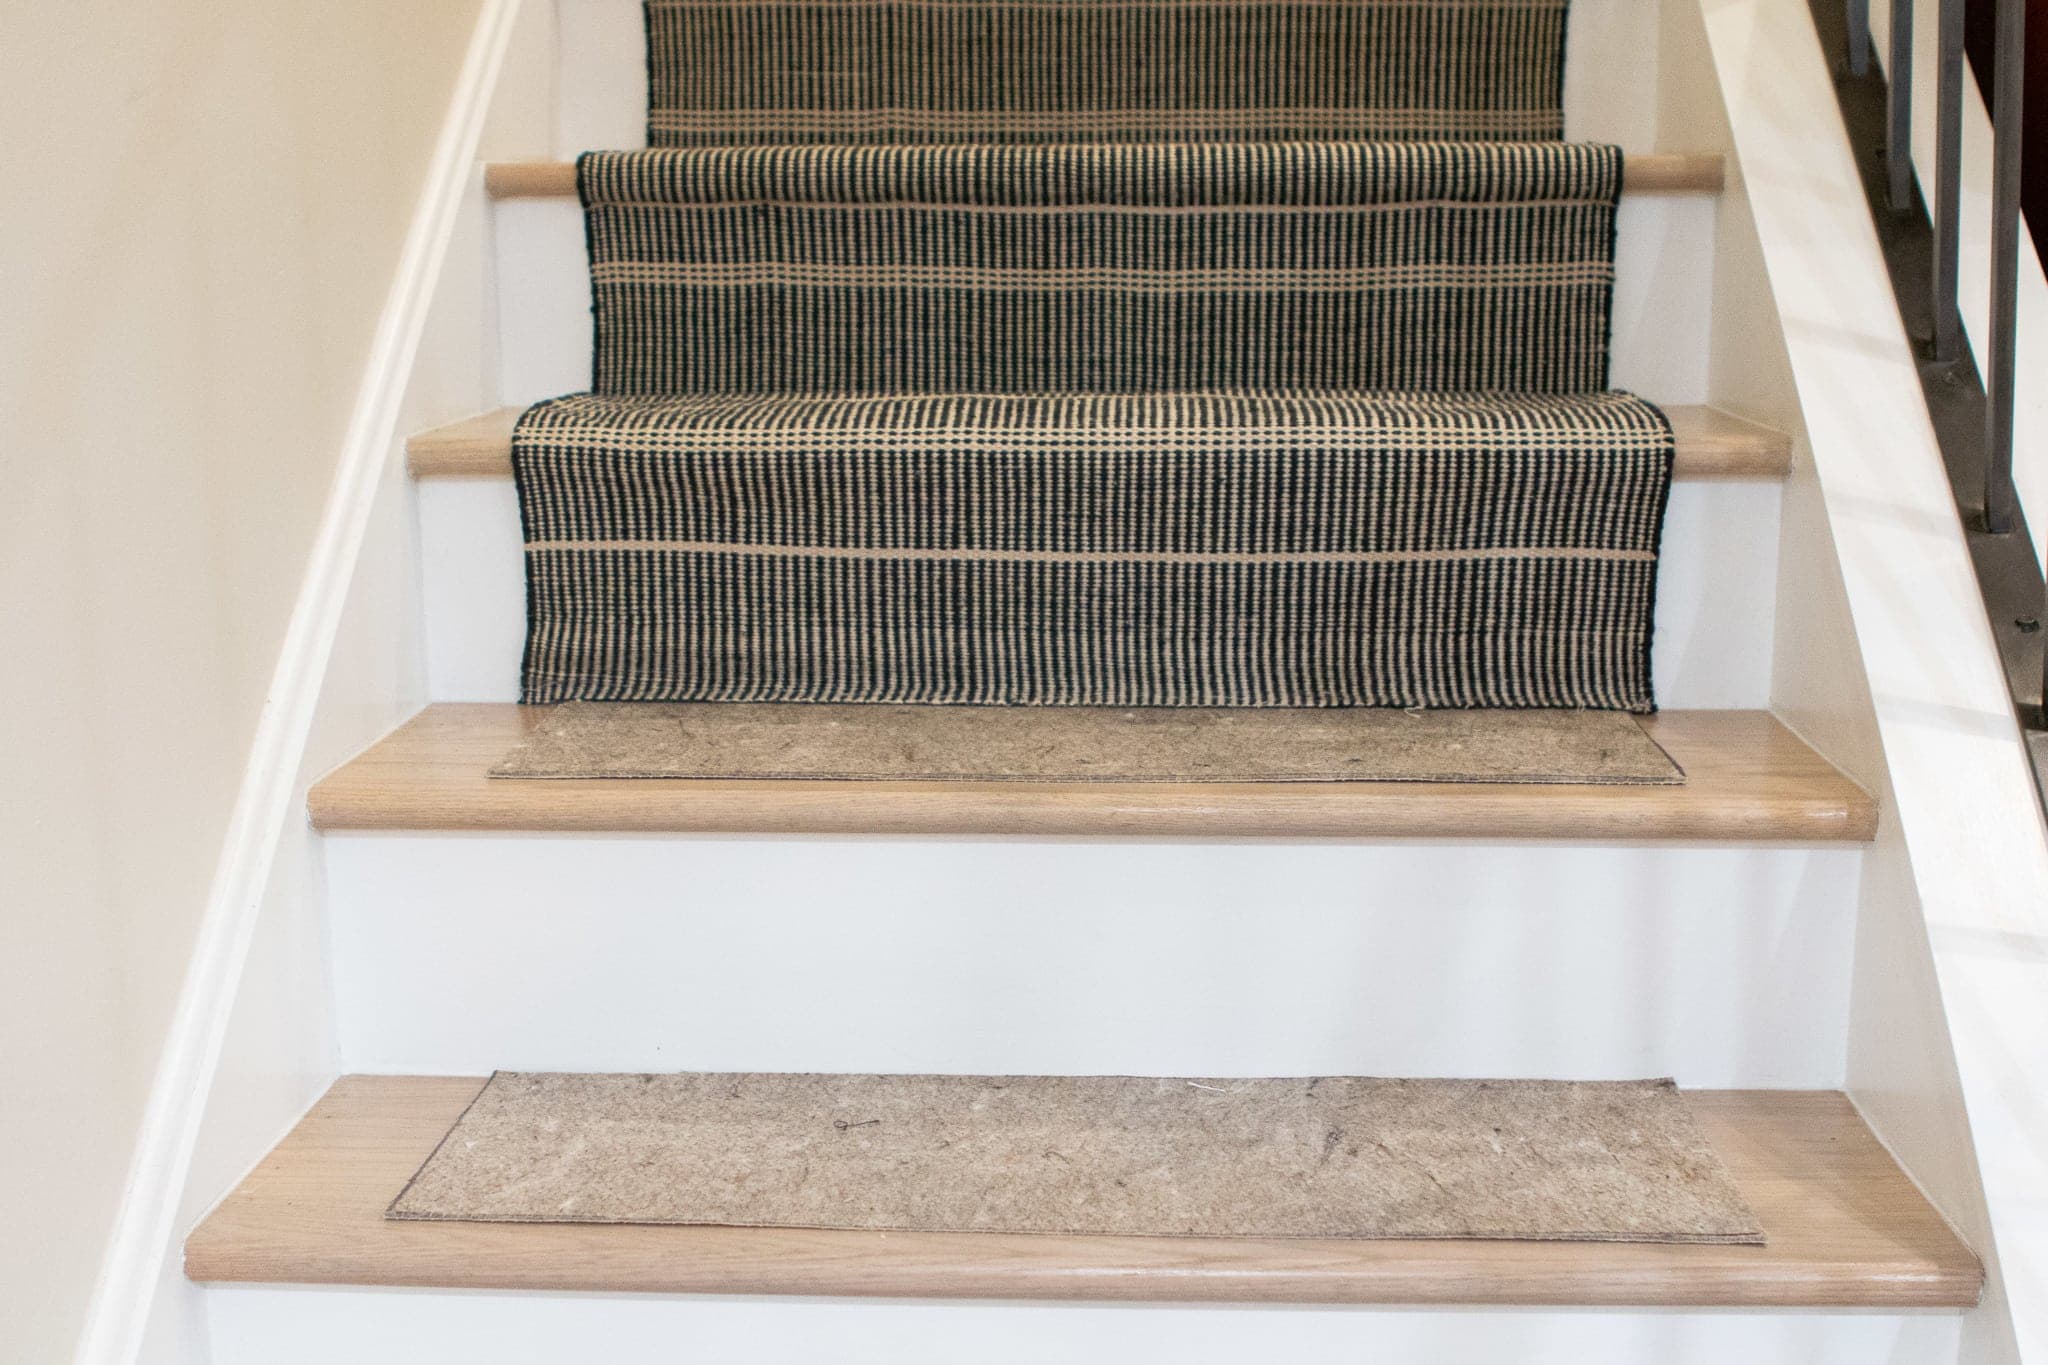 How to add another stair runner